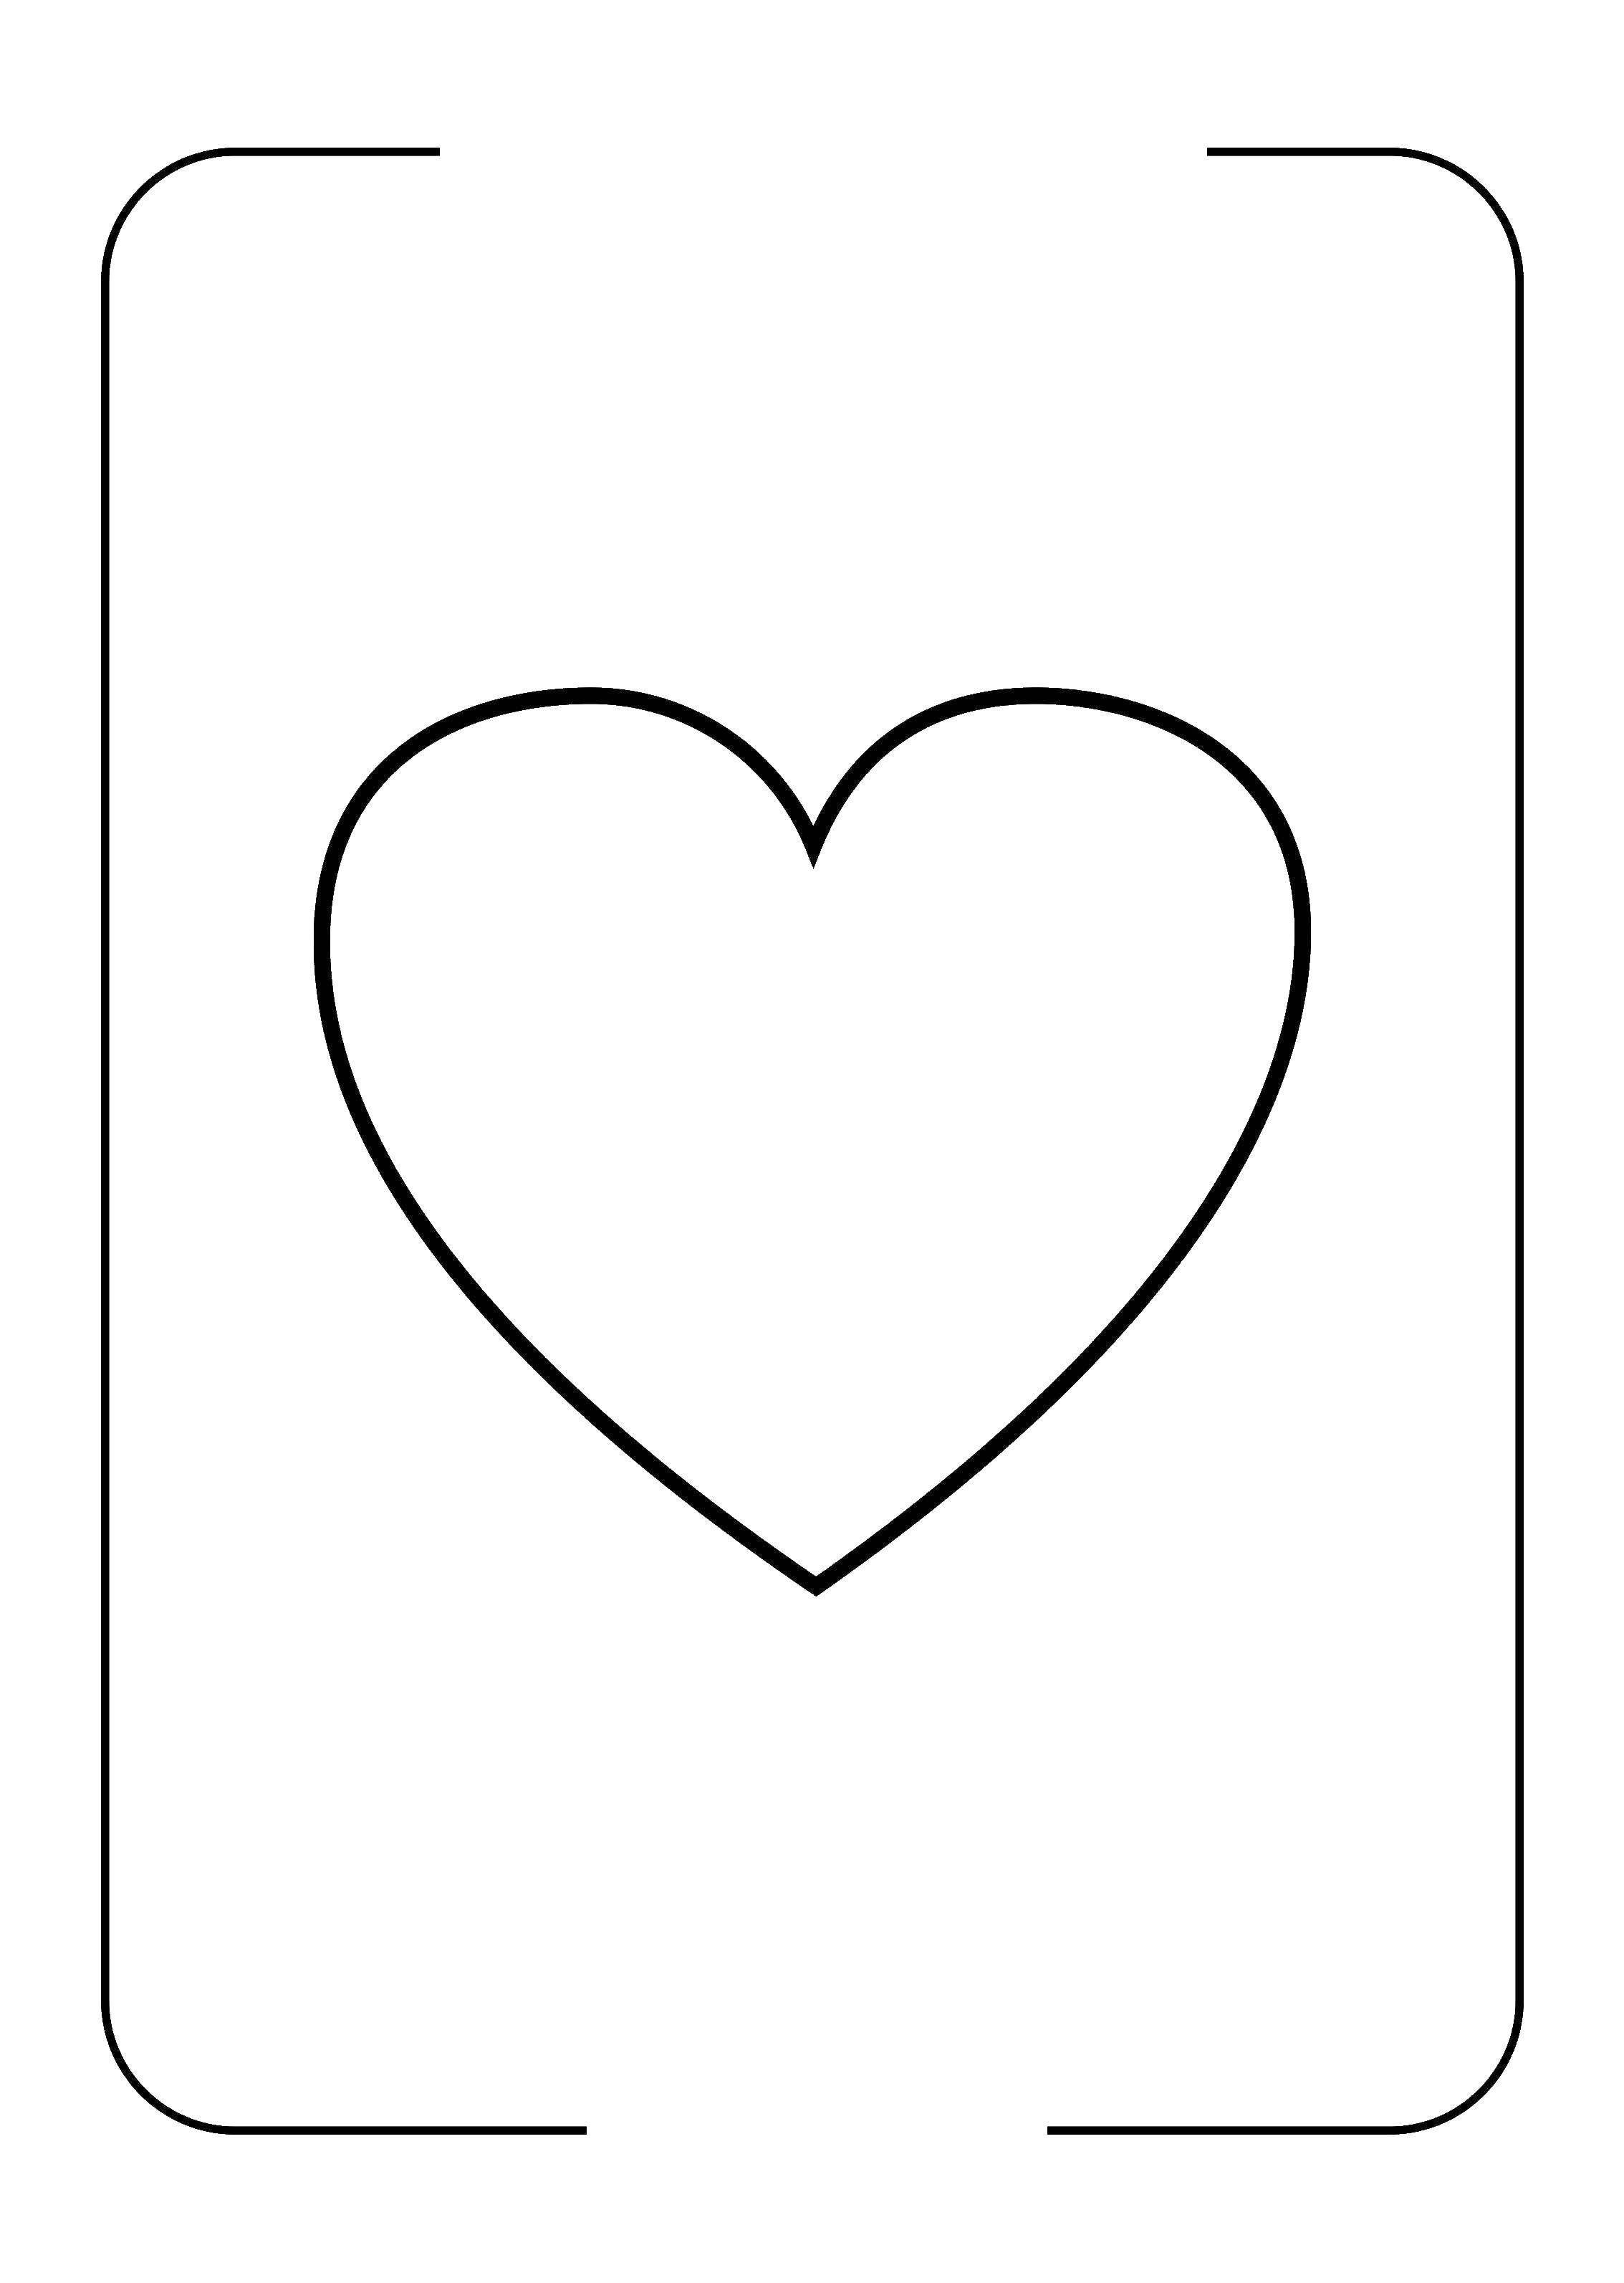 Coloring Heart. Category I love you. Tags:  Heart, love.